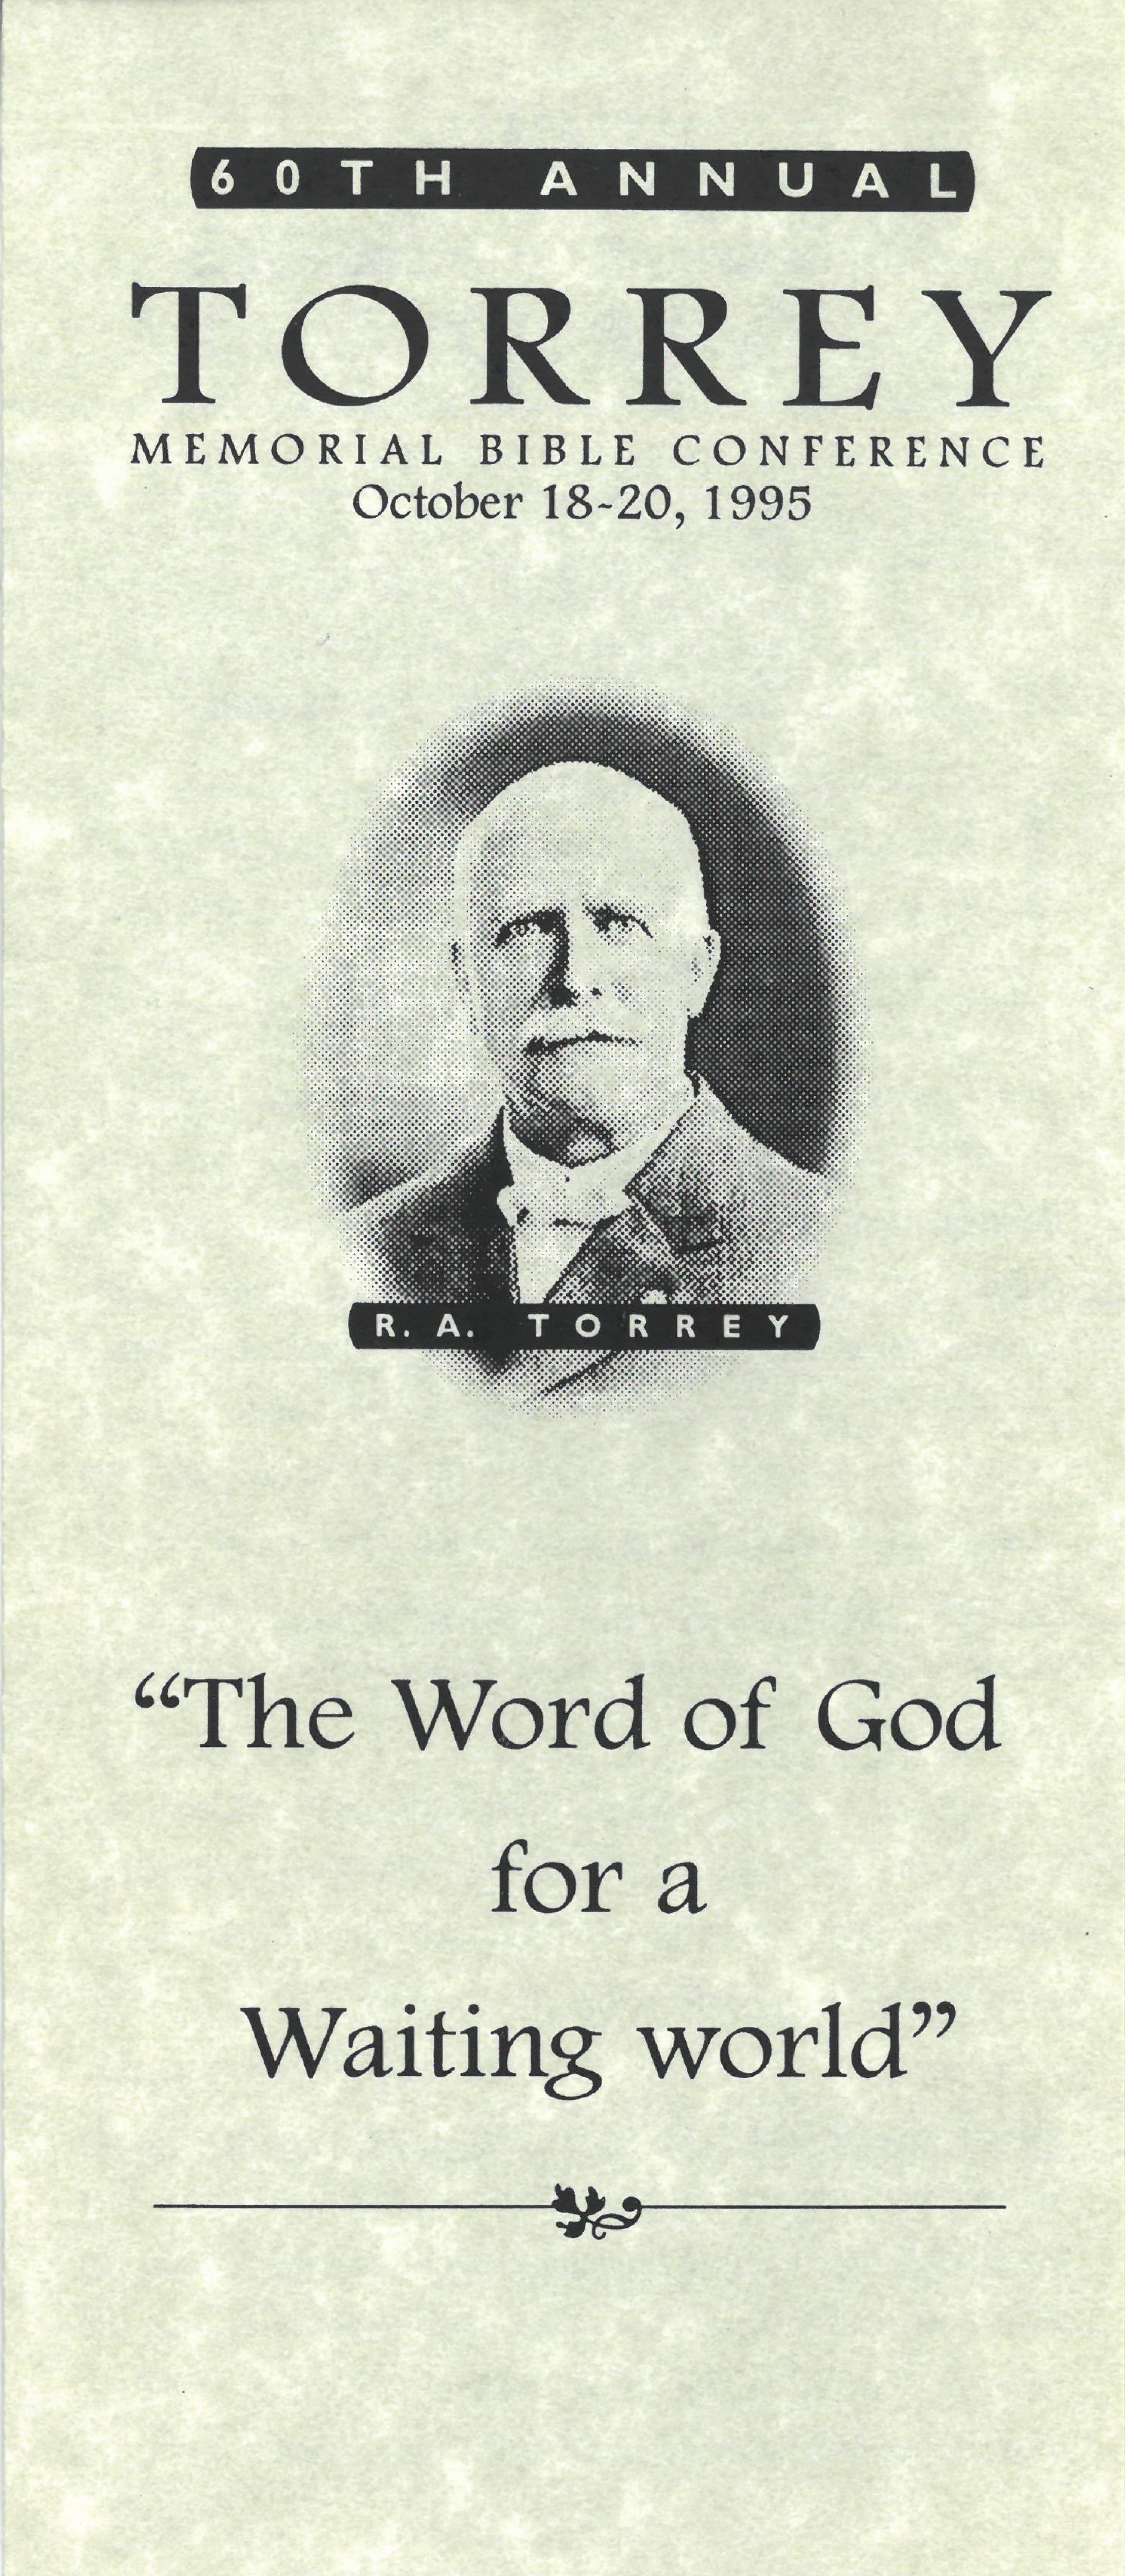 Torrey Memorial Bible Conference LX: The Word of God for a Waiting World